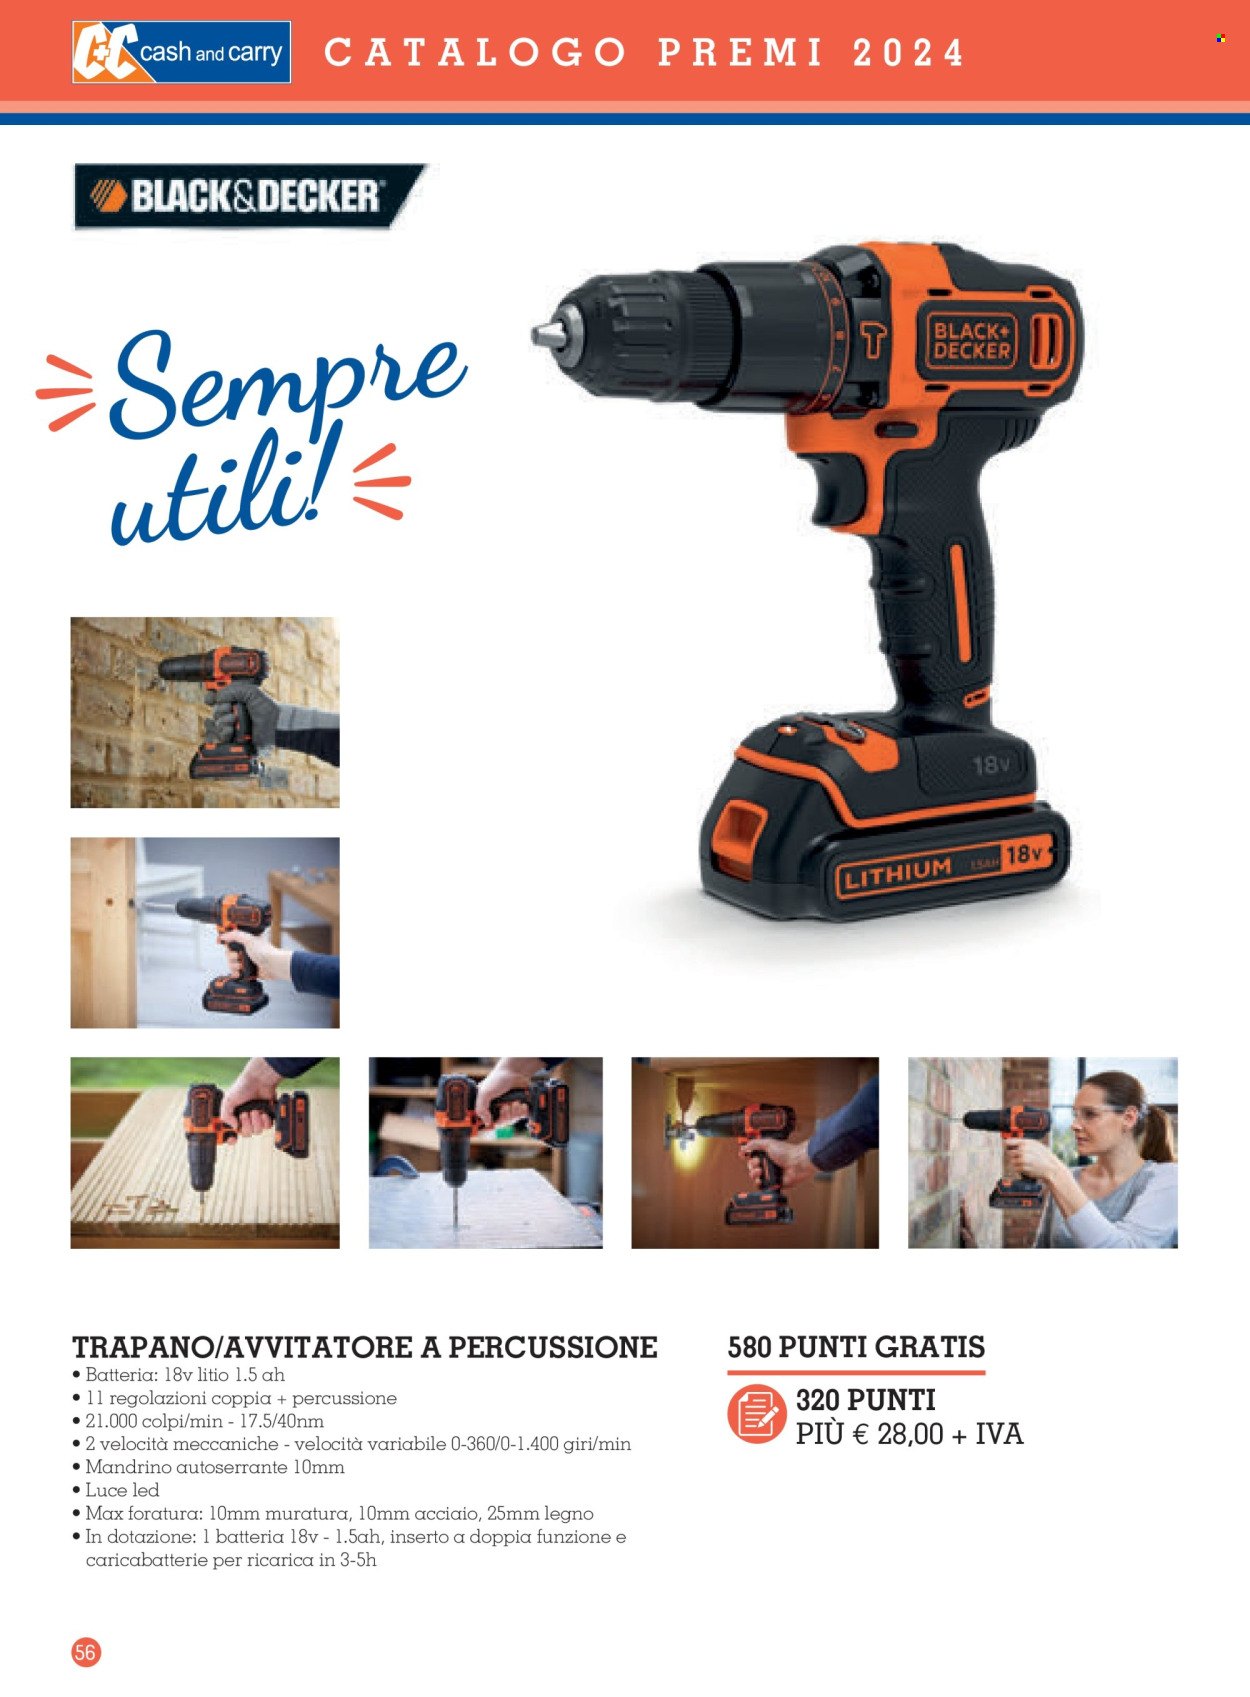 thumbnail - Volantino C+C Cash & Carry - 11/3/2024 - 2/2/2025 - Prodotti in offerta - caricabatterie, luce, luce LED, trapano. Pagina 56.